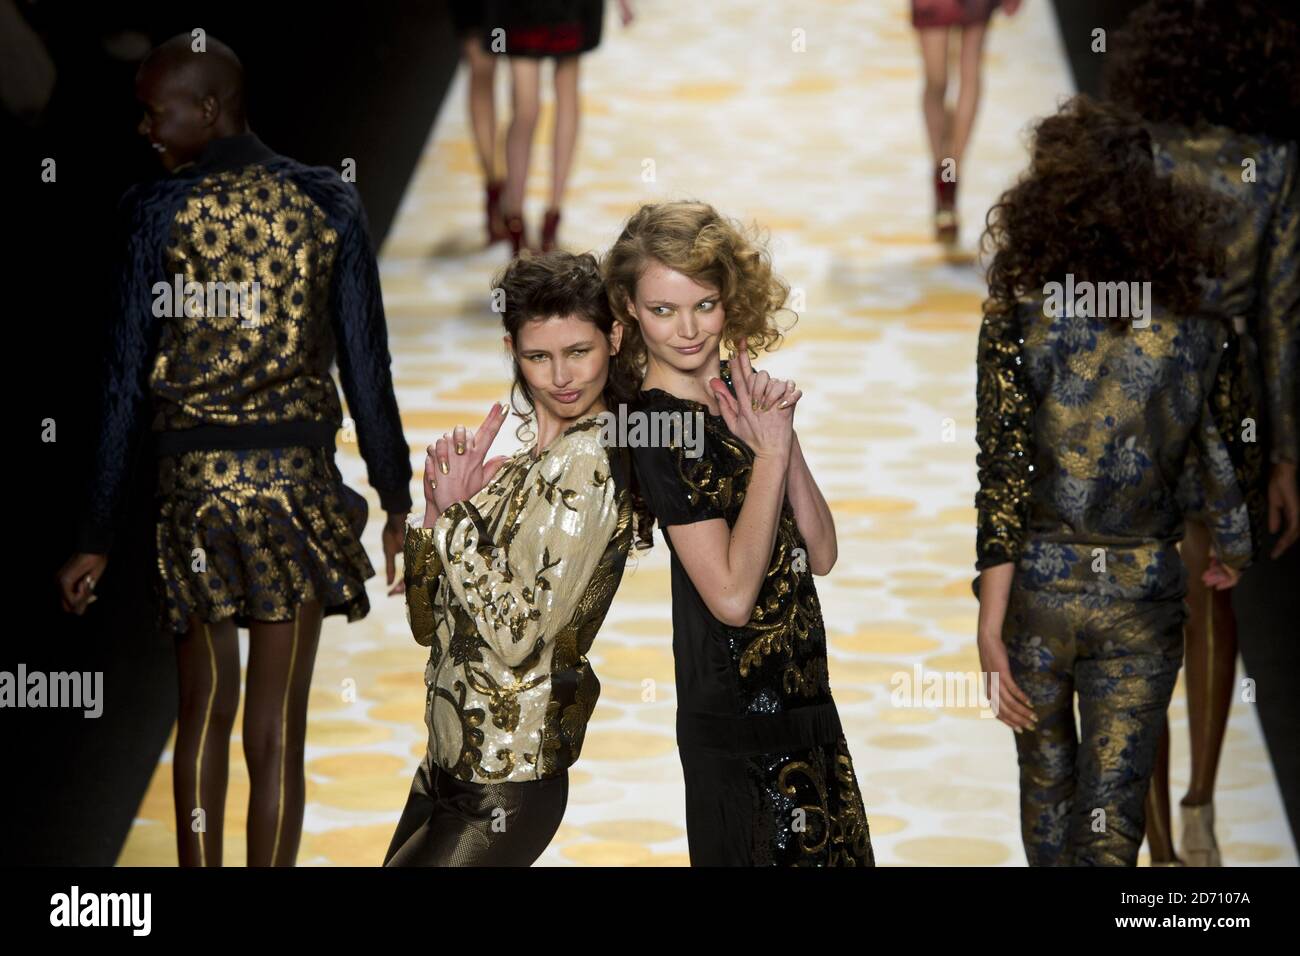 Models pose on the catwalk for the Desigual fashion show, held at the  Lincoln Centre in New York, as part of Mercedes Benz New York Fashion Week  F/W 2014 Stock Photo -